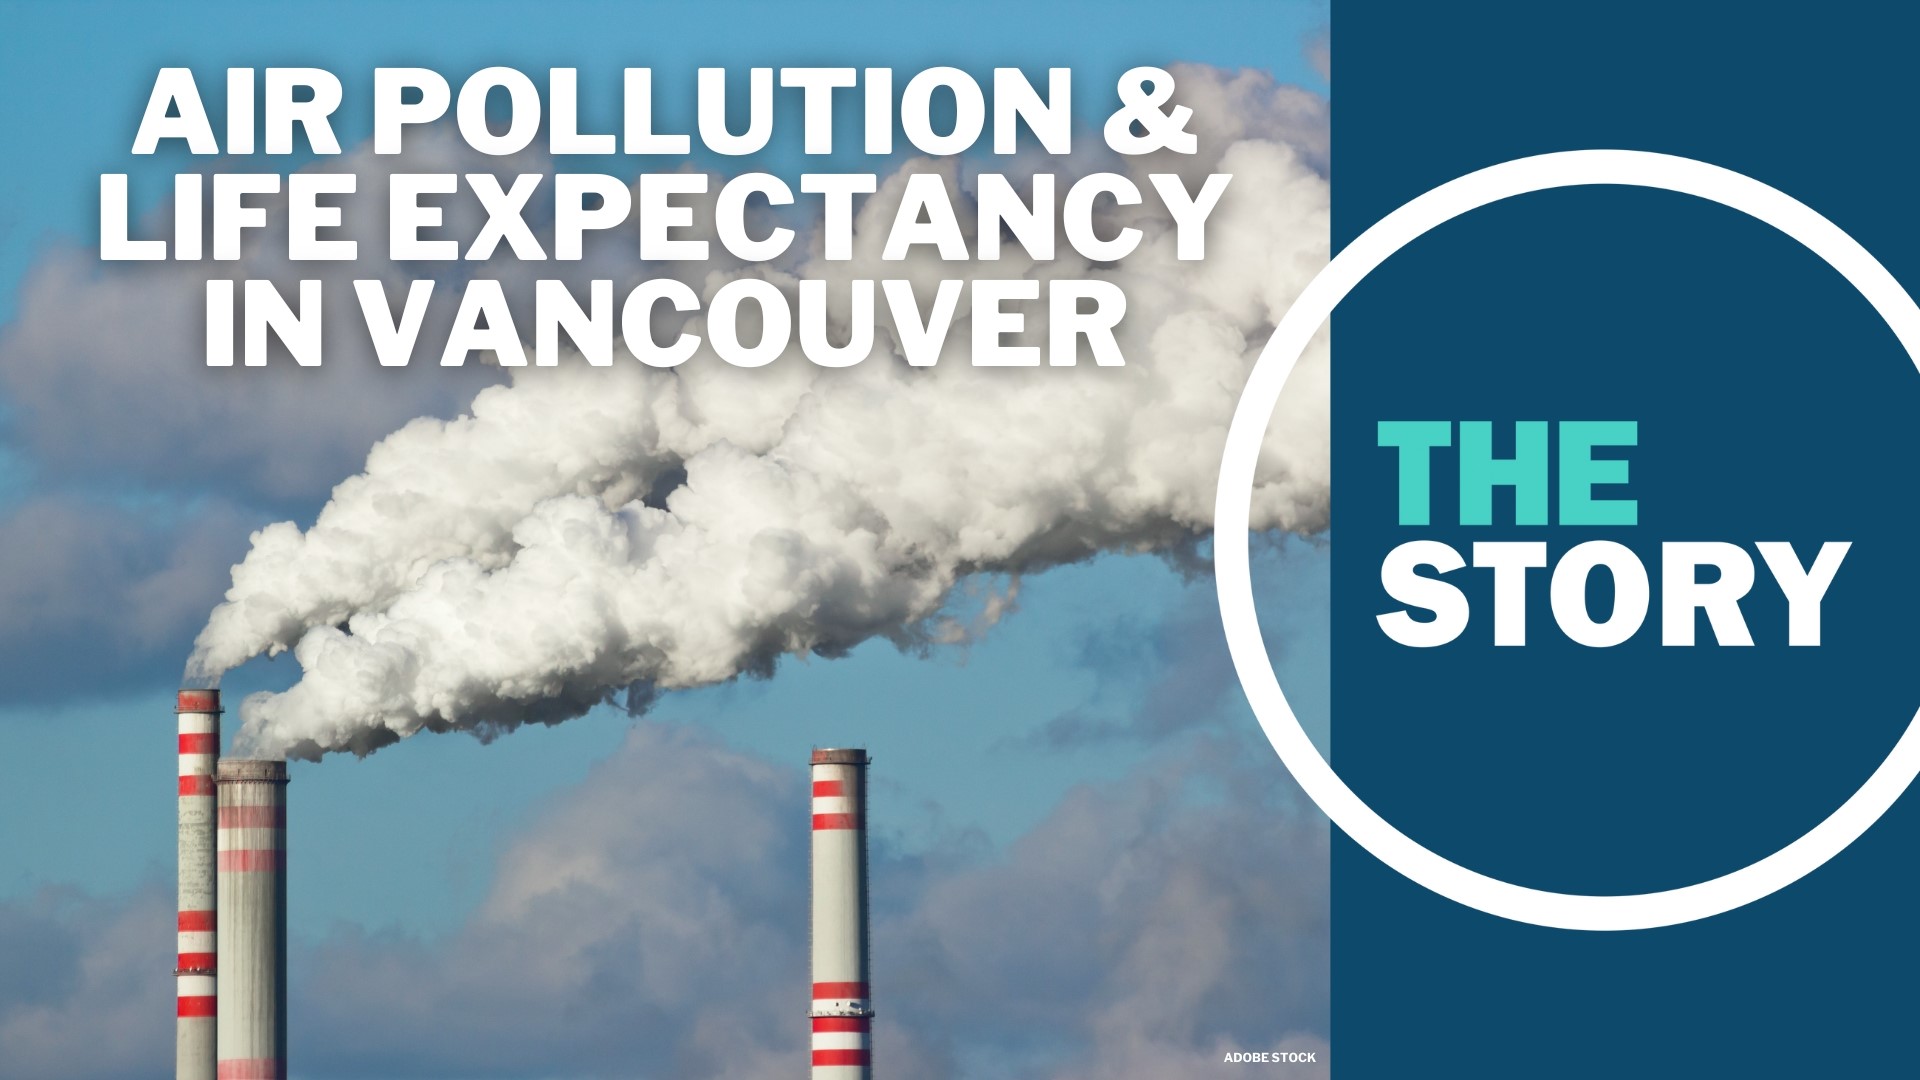 The report identified Vancouver as one of 16 areas in Washington with sizeable socioeconomic disadvantages and high levels of air pollution.